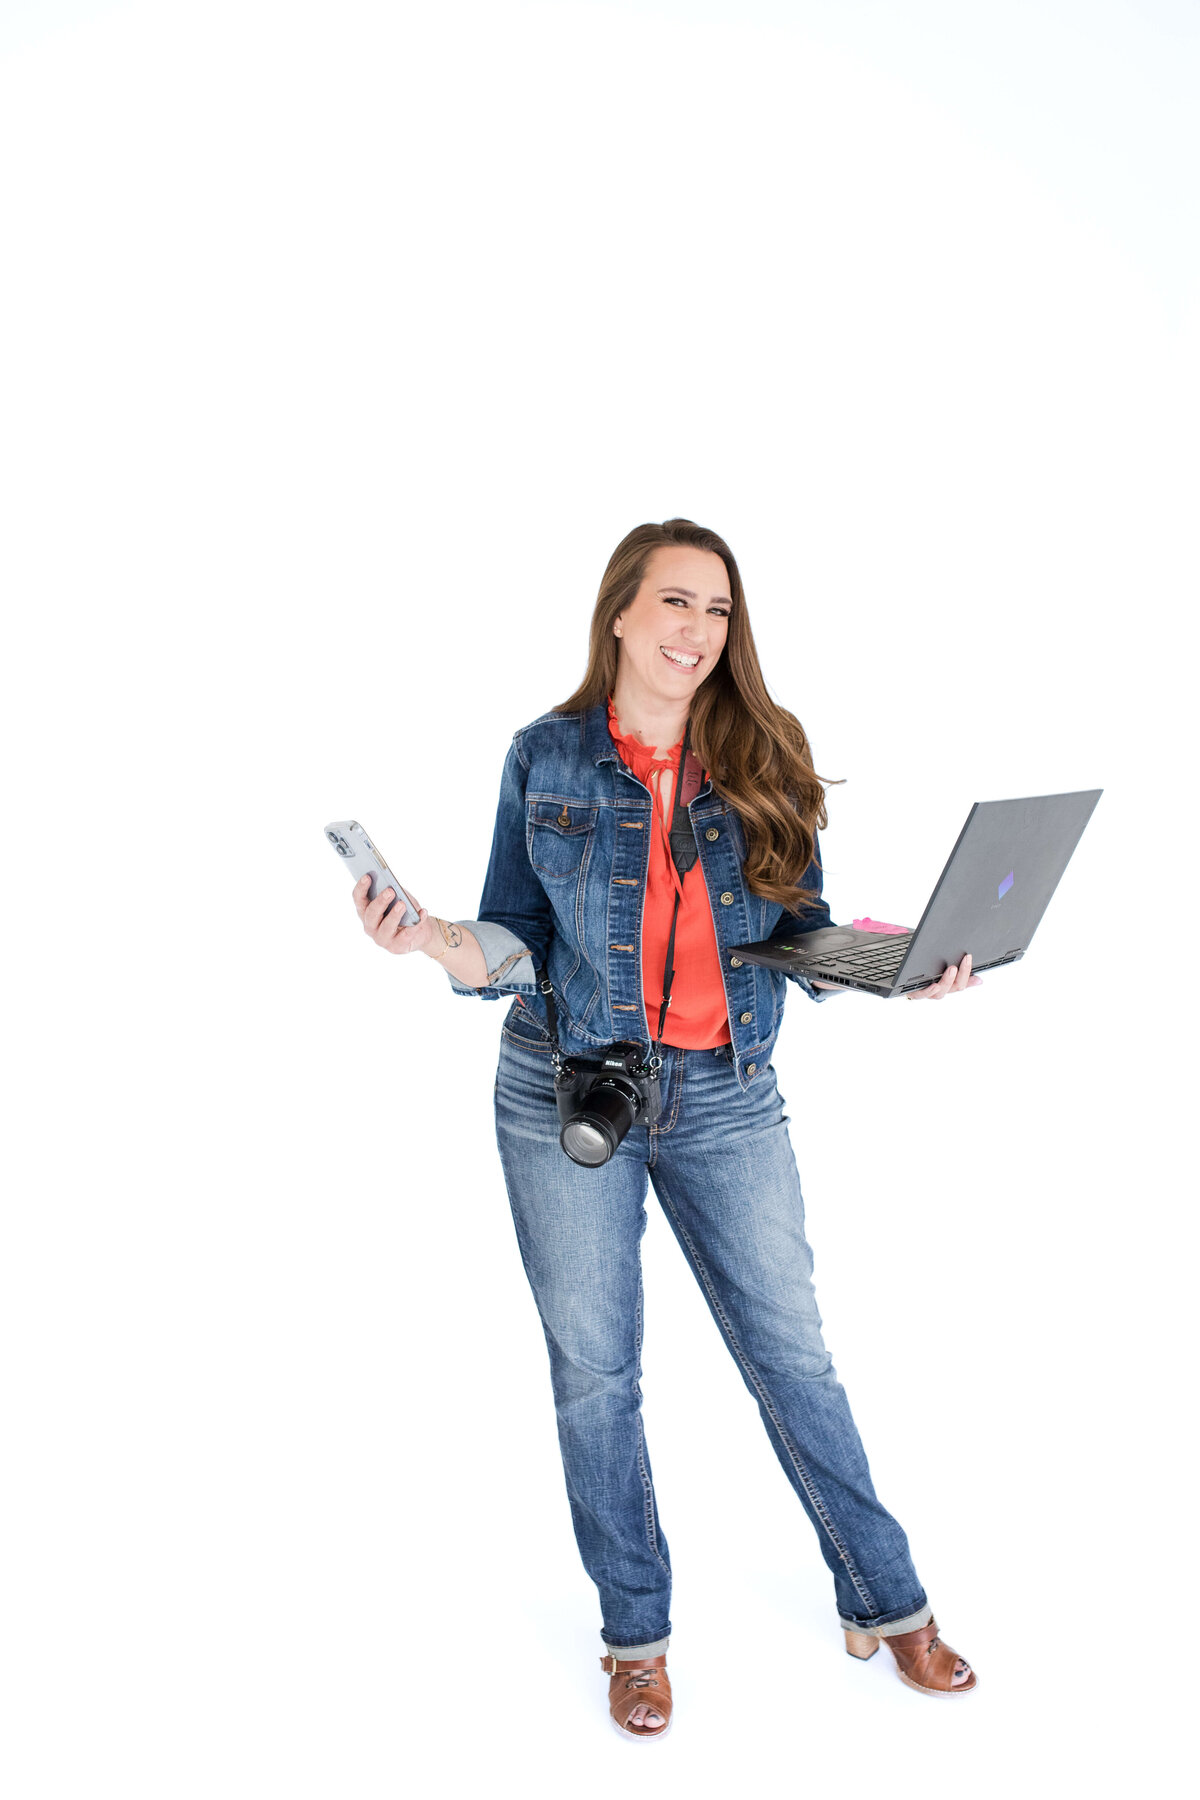 brand photo of photographer holding a laptop and a camera and laughing captured by brand photographer near me at a studio session with a white backdrop